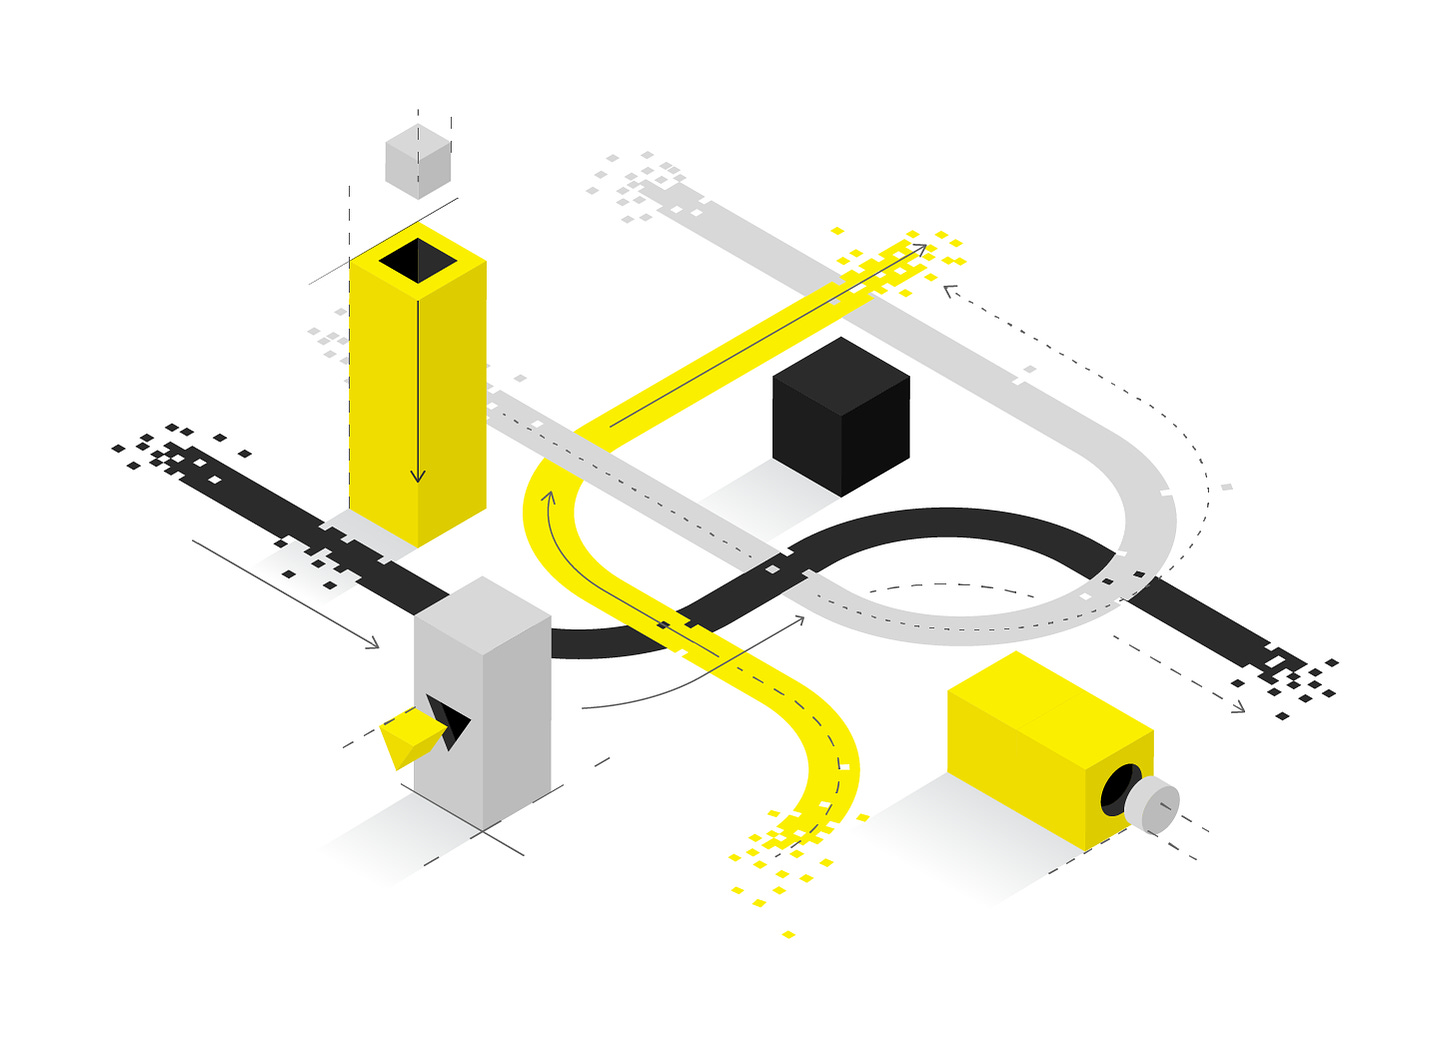 A digital vector illustration in gray, black and yellow, with architectural elements like rectangles, dotted lines and arrows. 